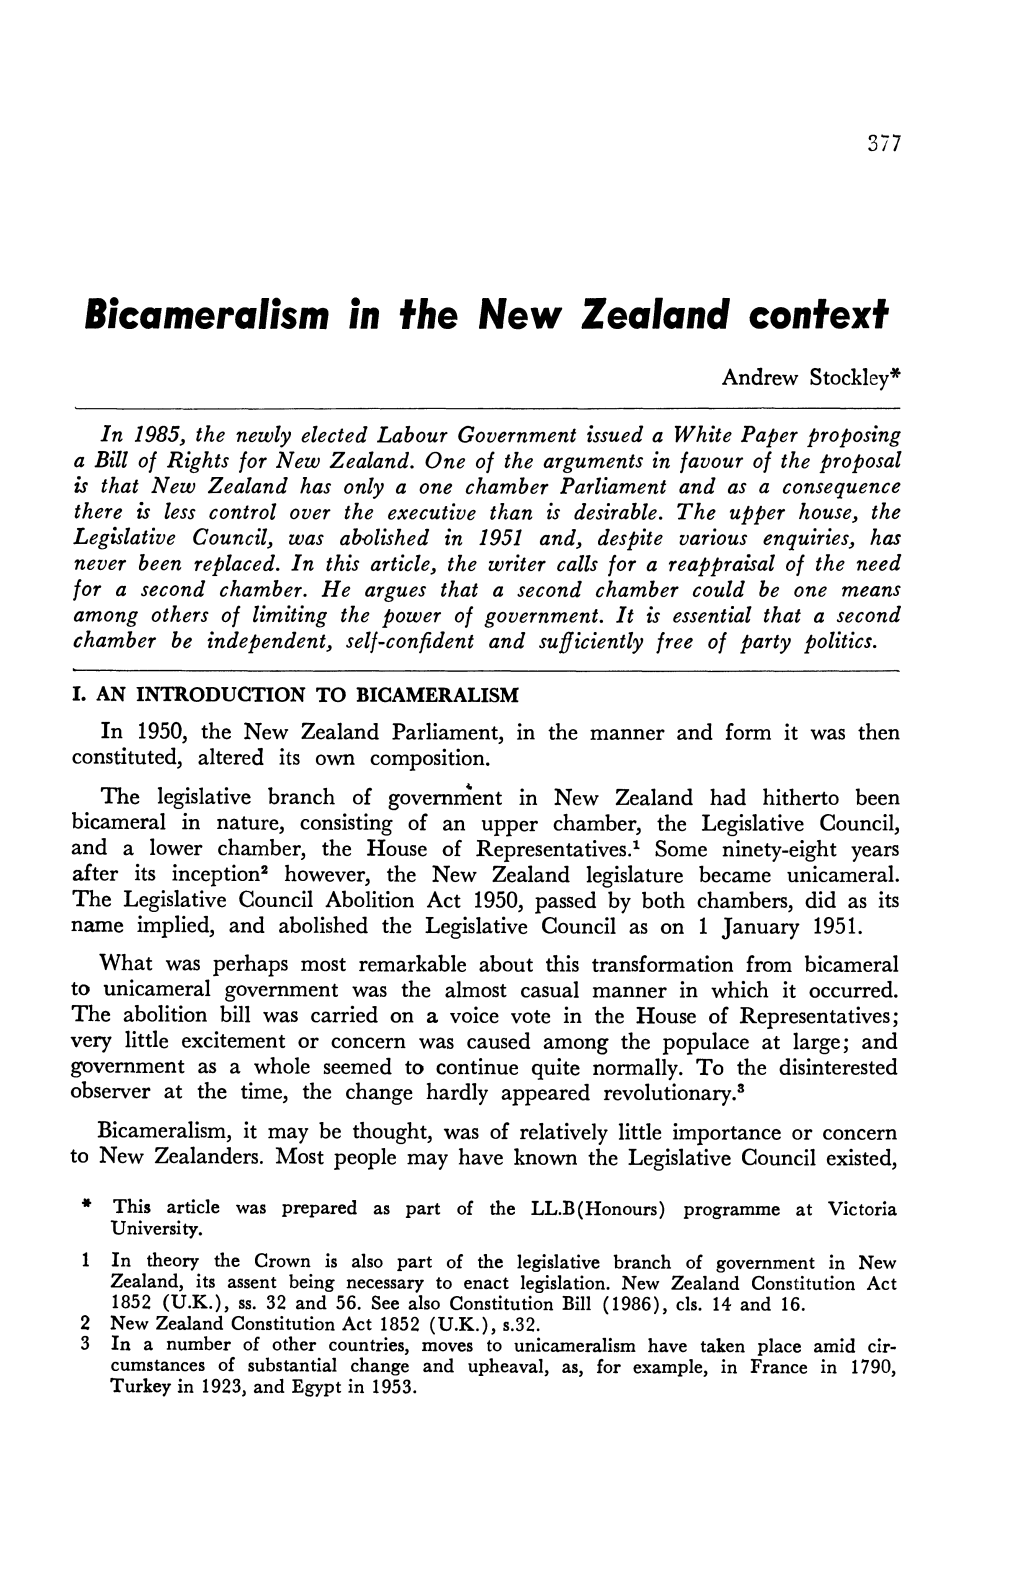 Bicameralism in the New Zealand Context